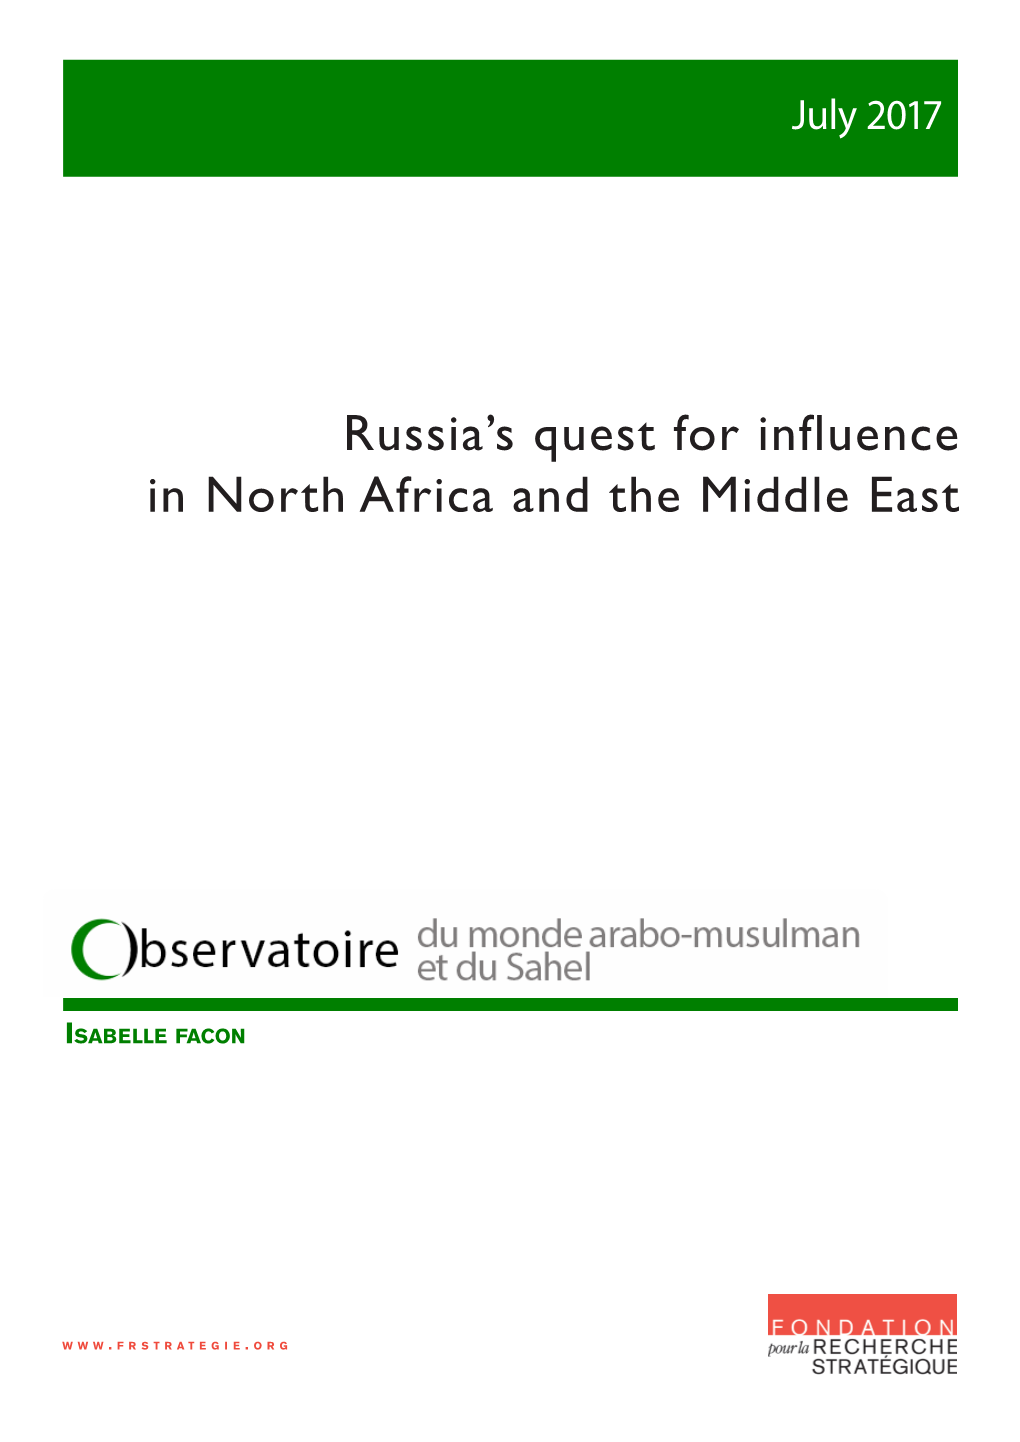 Russia's Quest for Influence in North Africa and the Middle East